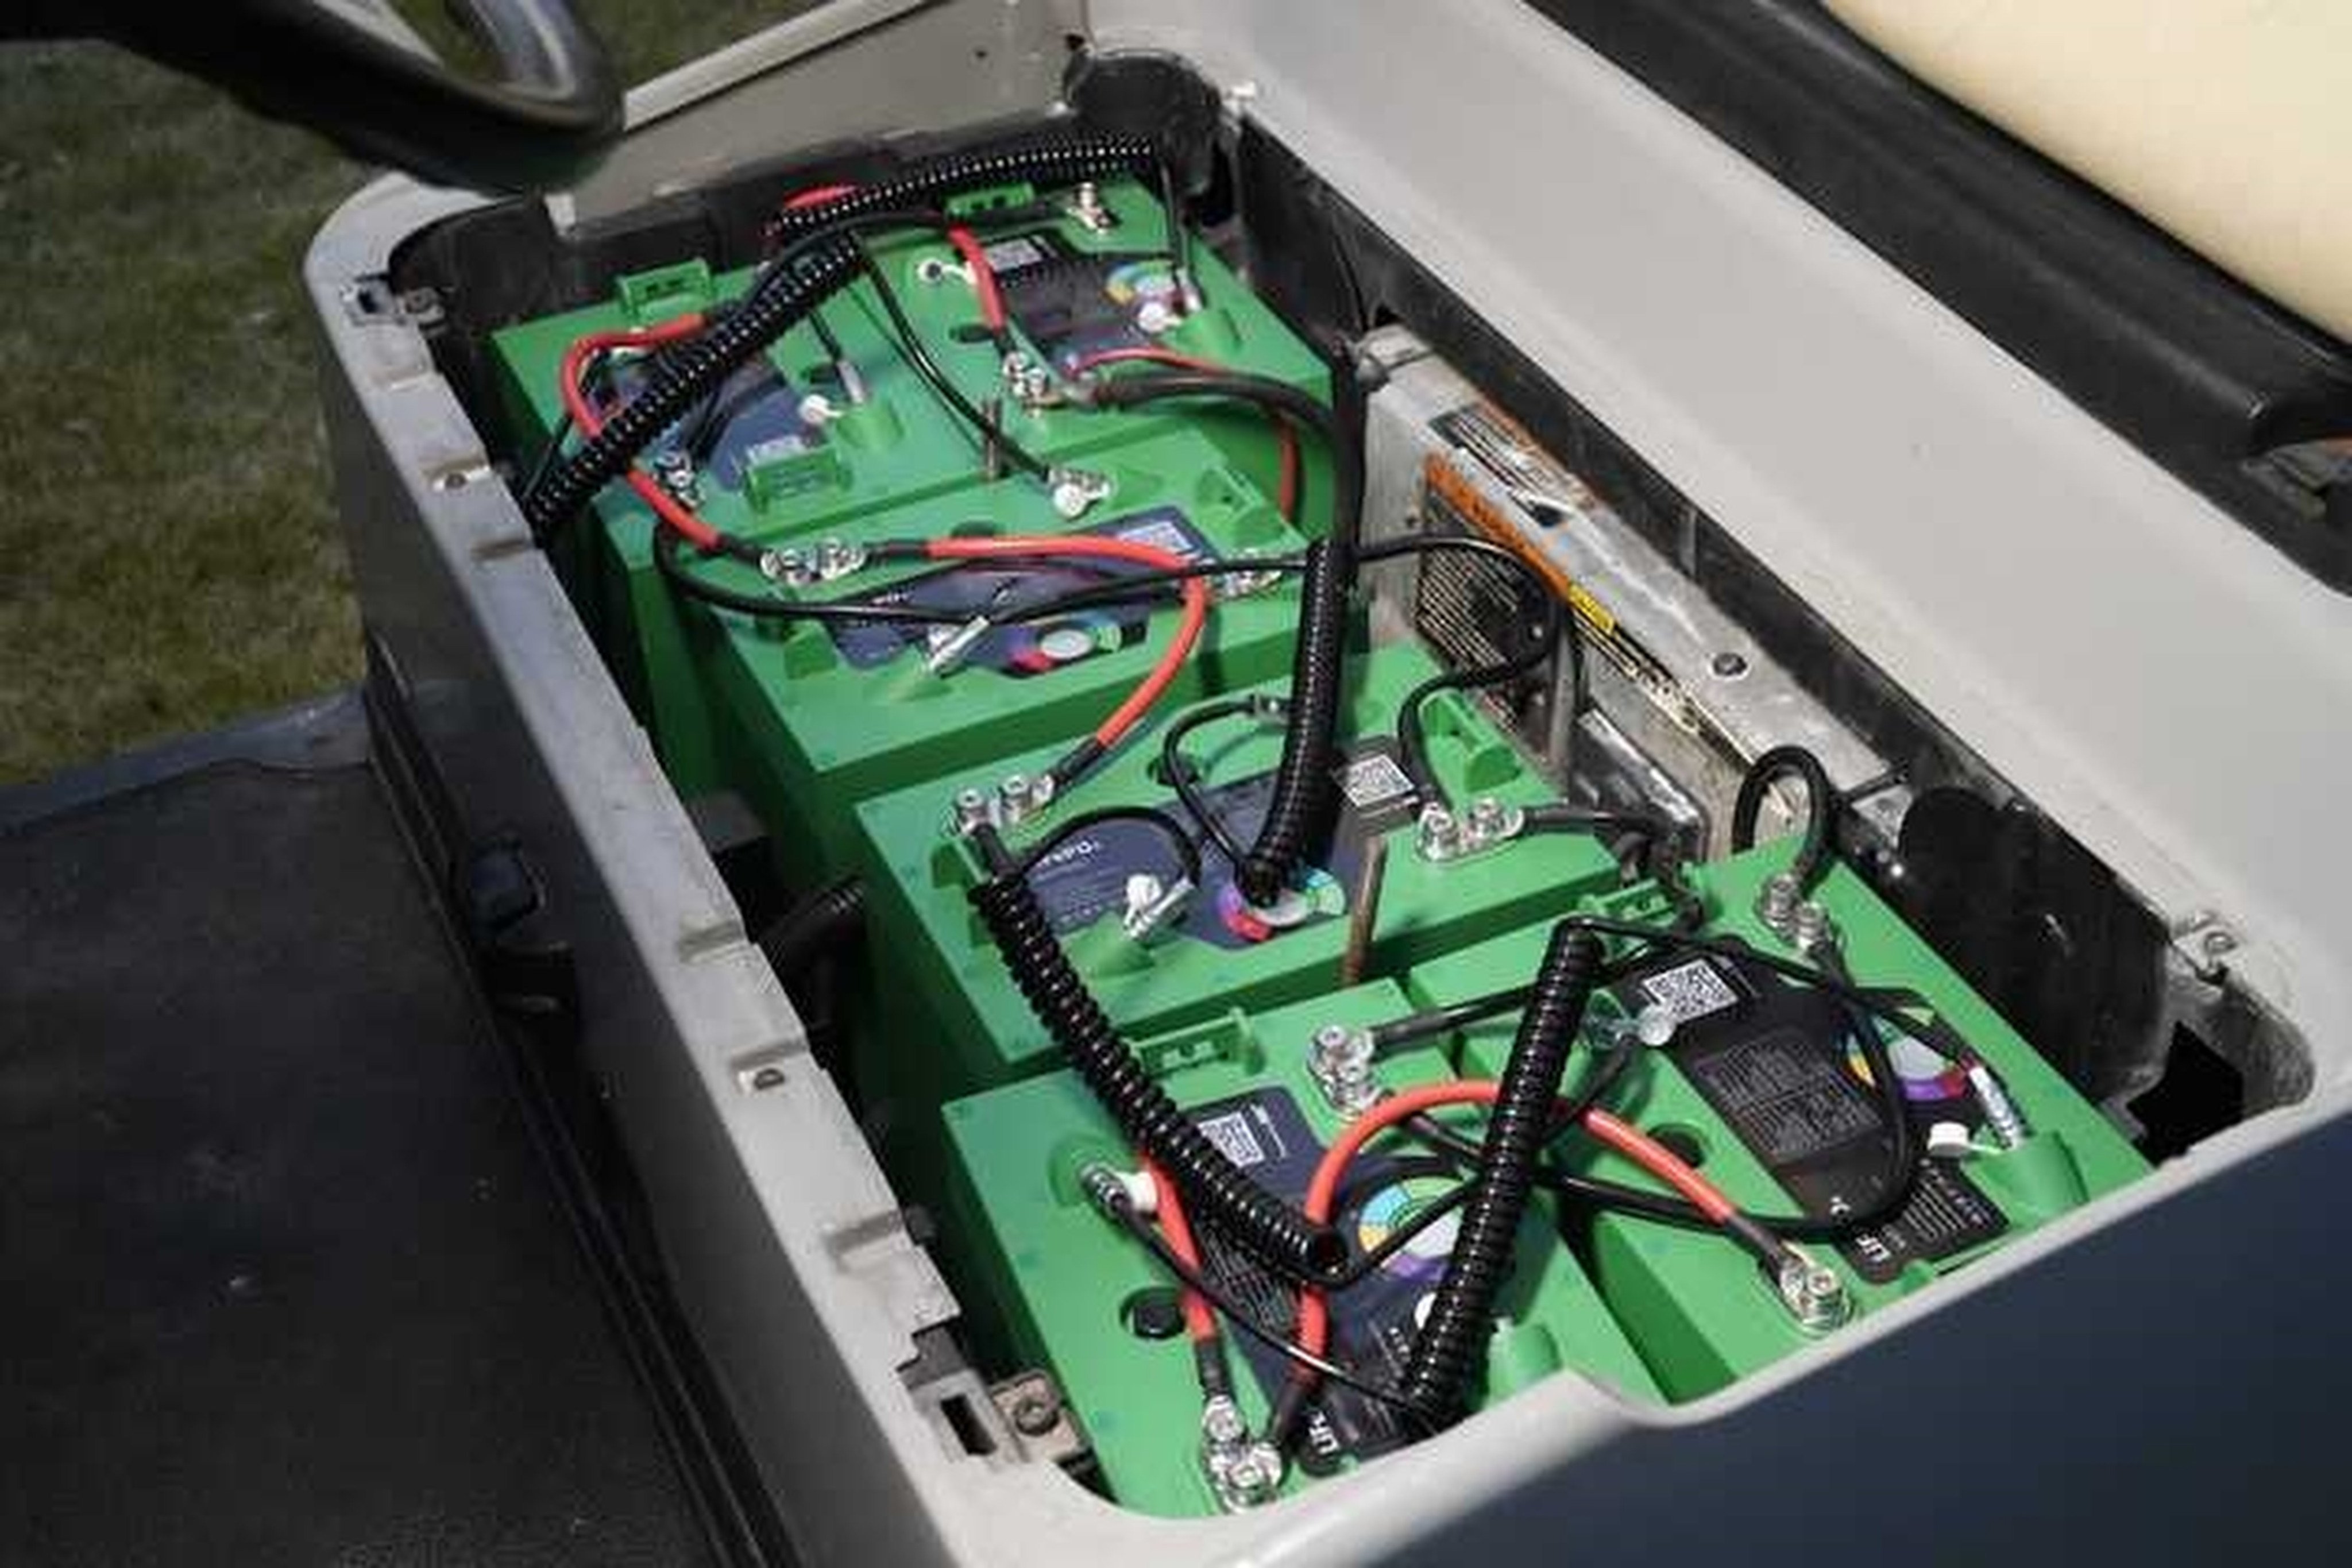 GRST is in talks with one of Hong Kong’s ‘large user of golf carts’ to use its lithium-ion batteries. Photo: Handout